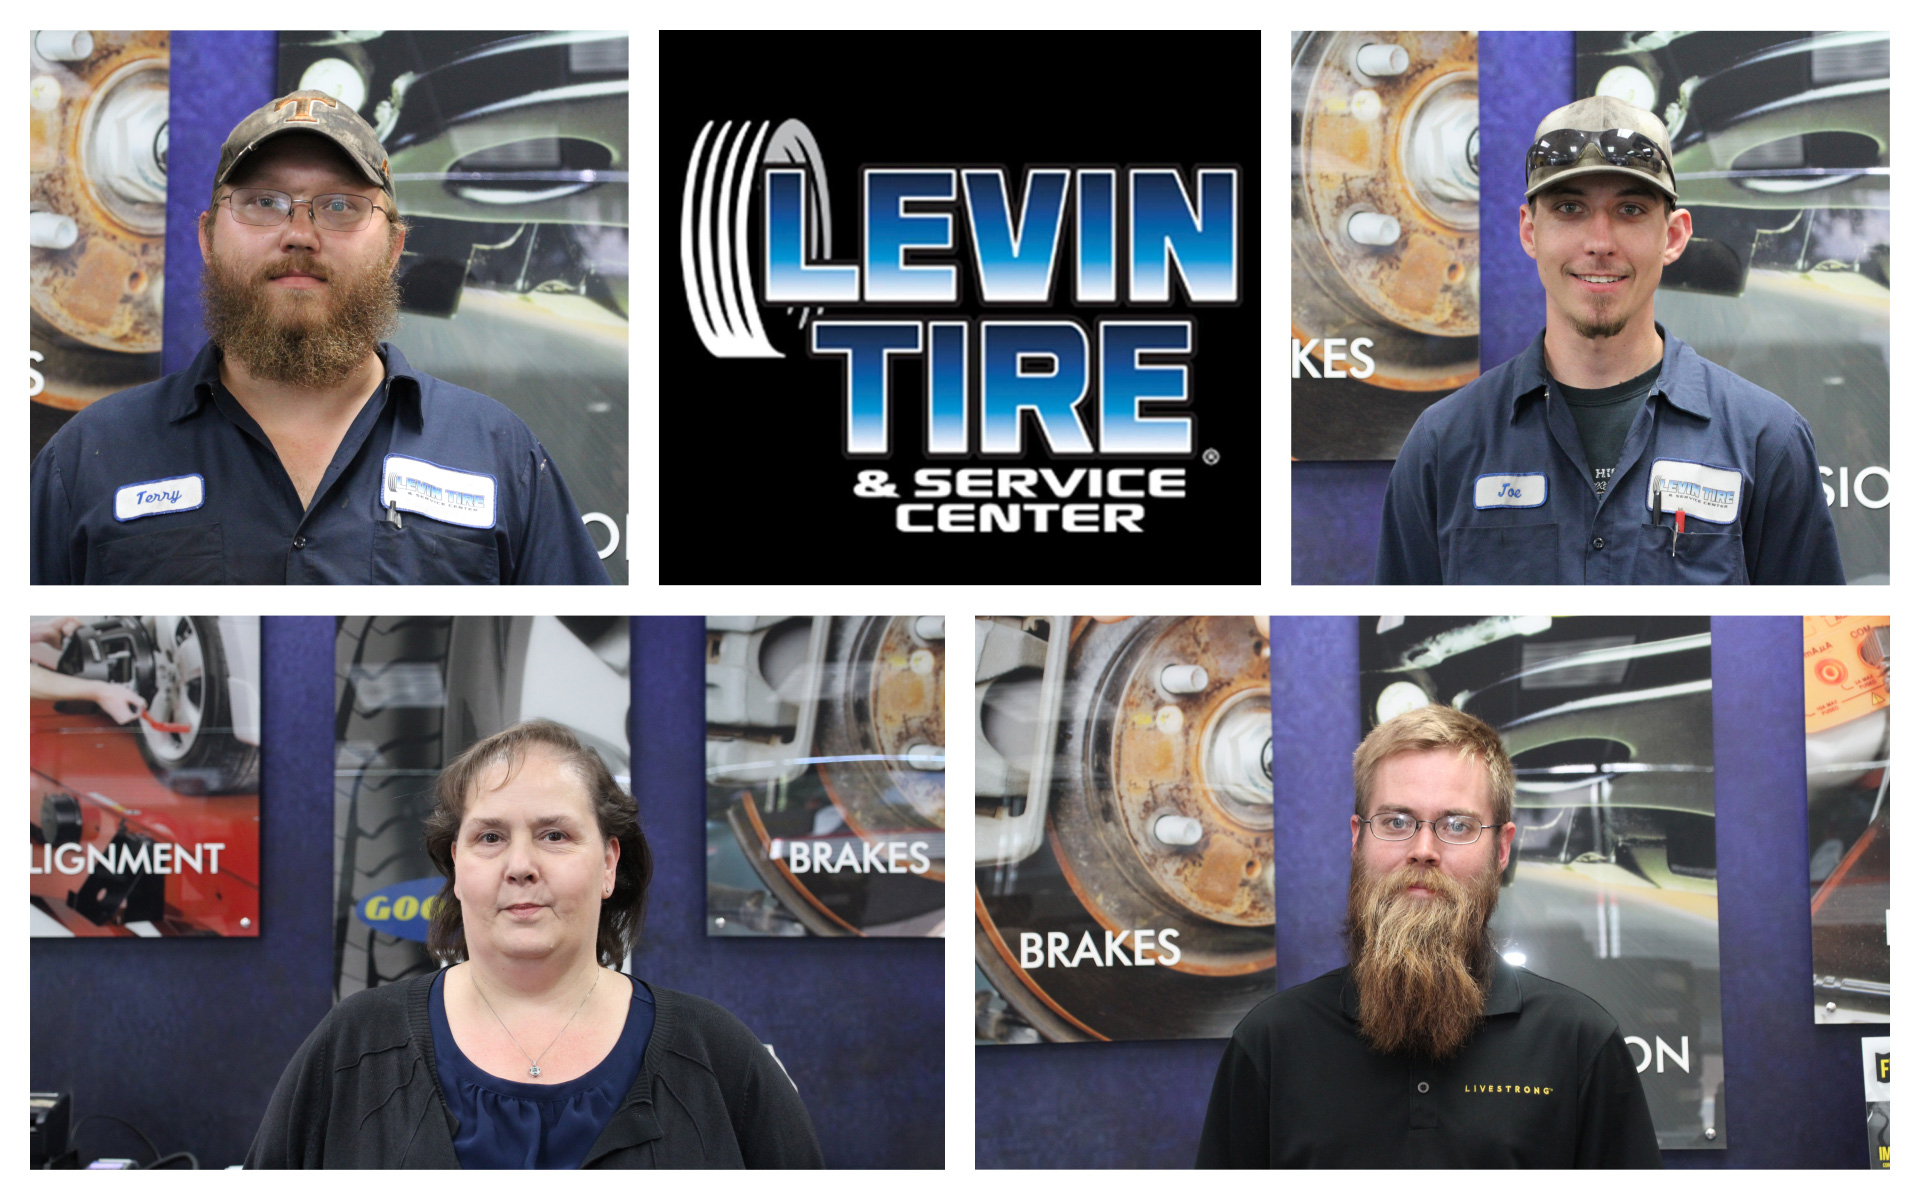 Meet the Levin Tire and Service Center Team at Crown Point!